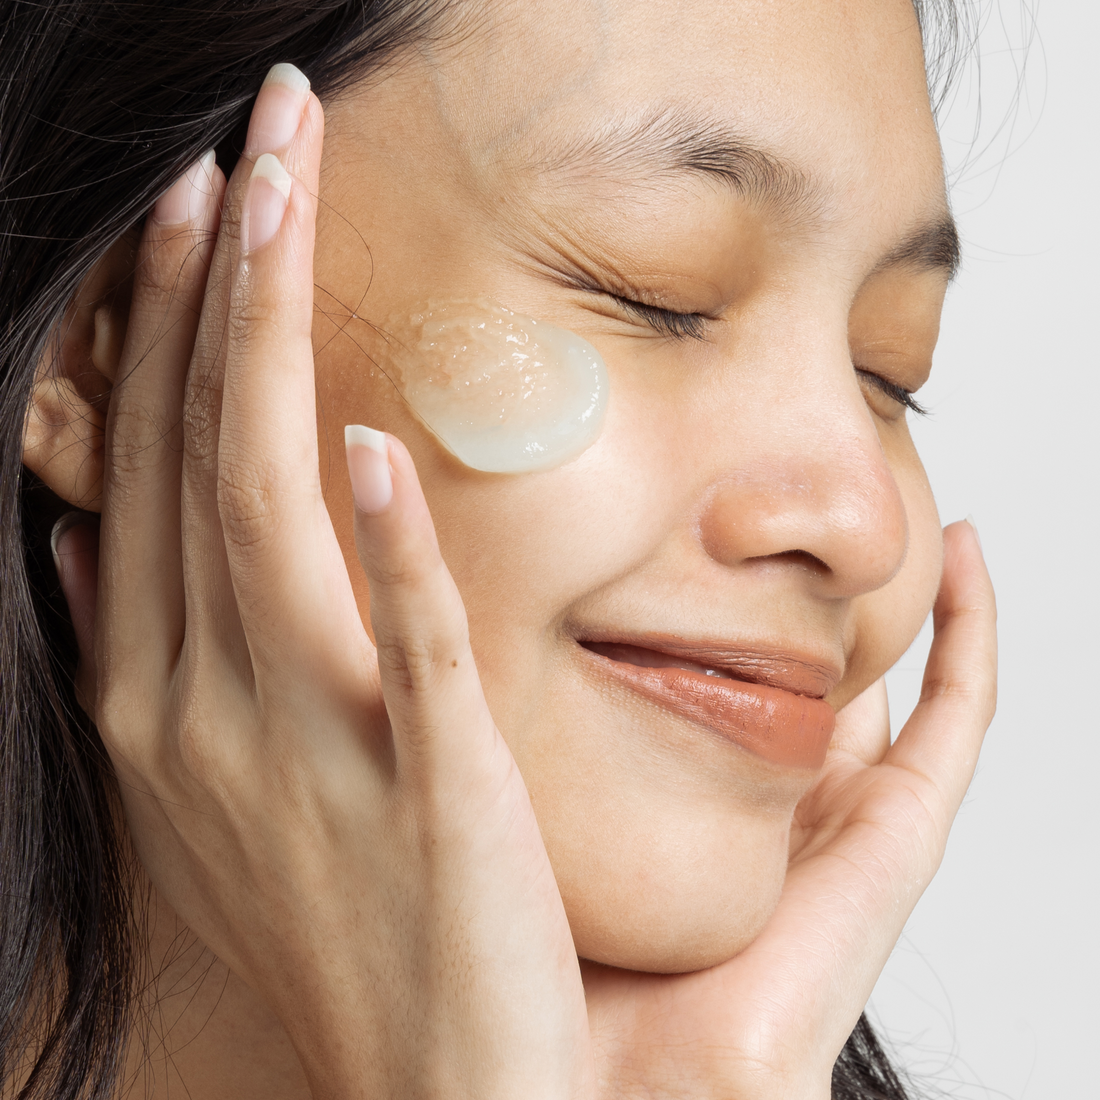 Slugging Skincare: All You Need to Know About This New Skincare Trend